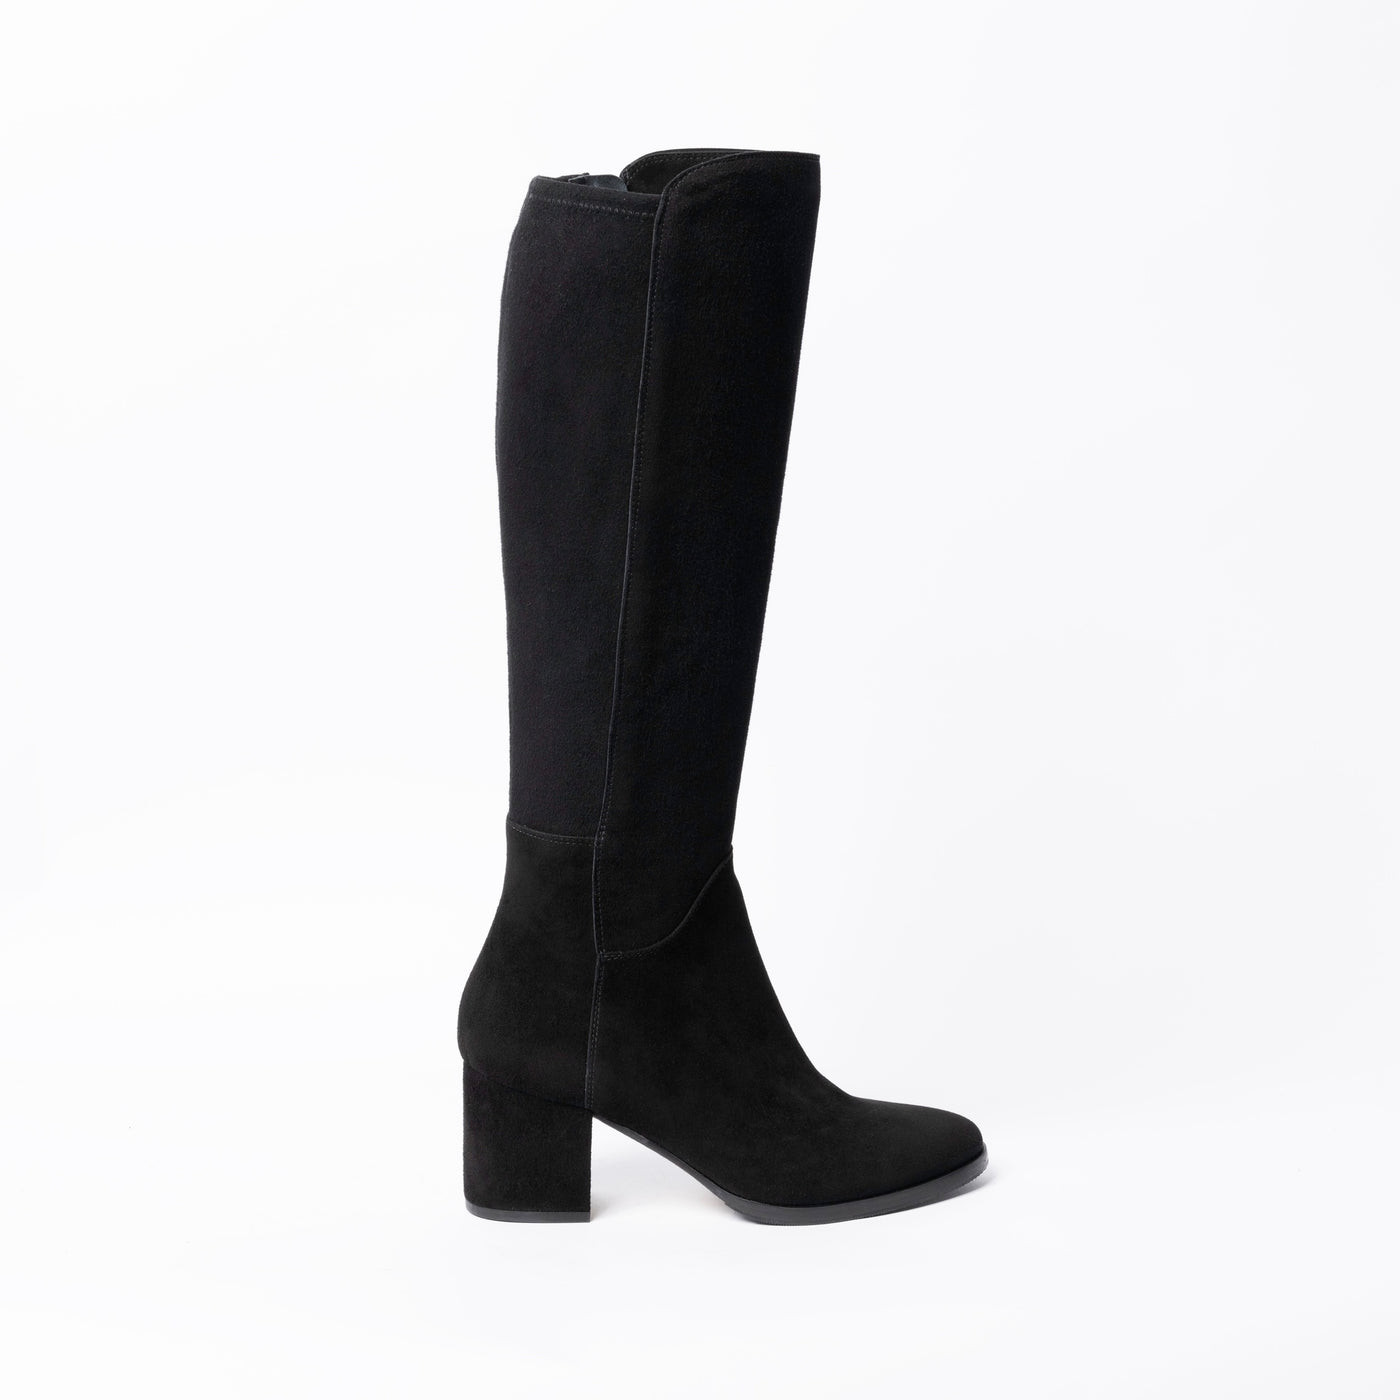 Stretch Knee High Boots in Black Suede